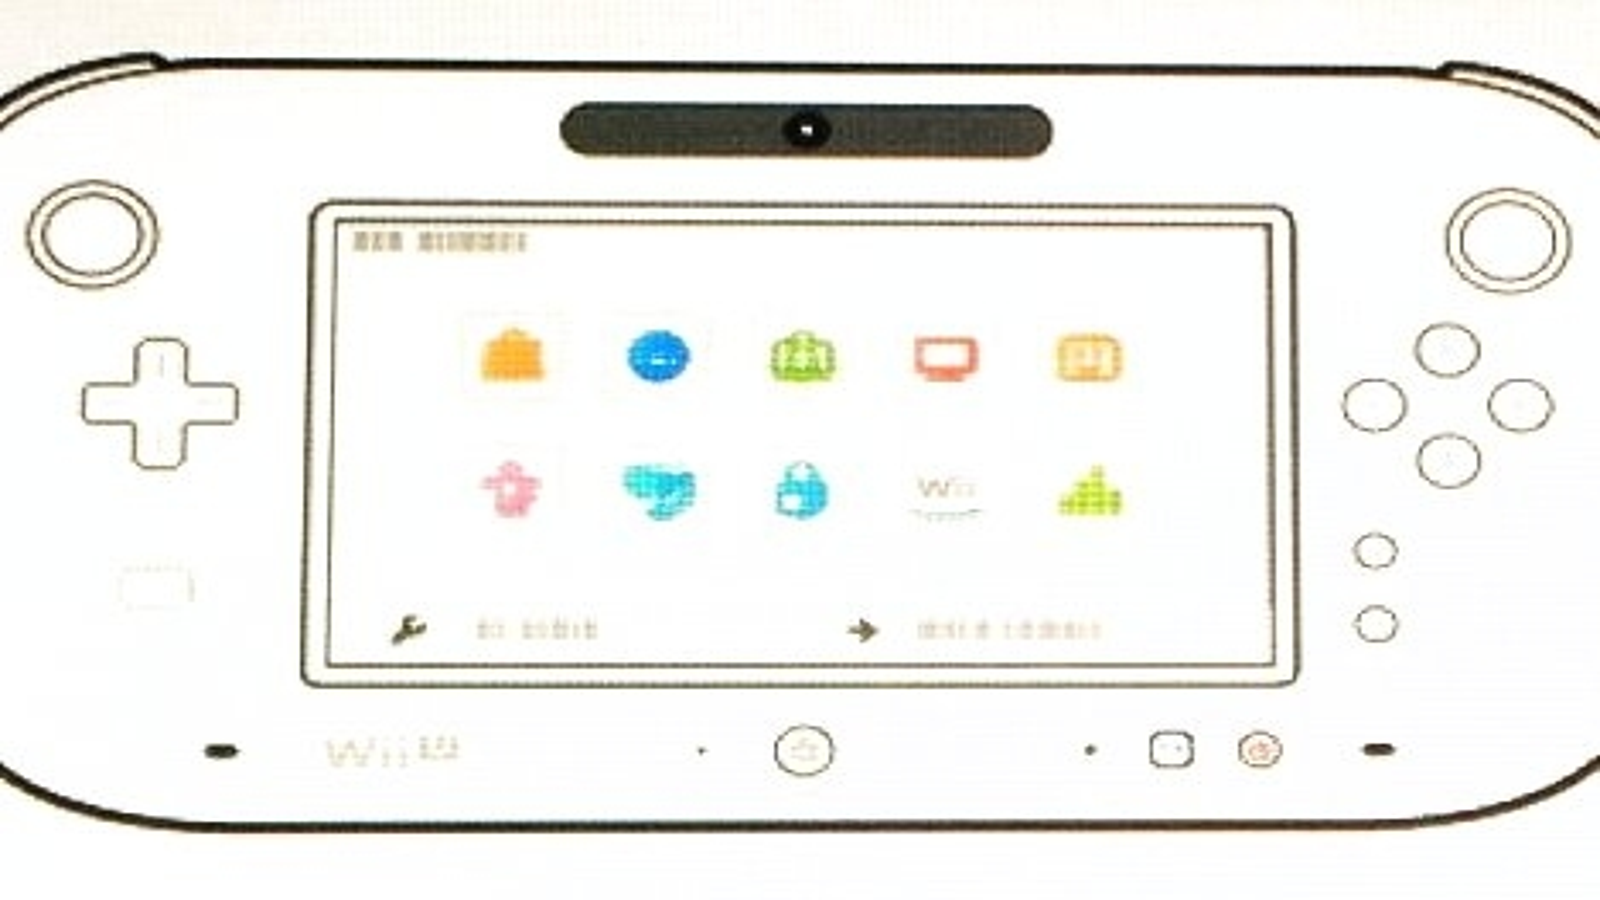 Wii U emulator appears with plans for fortnightly updates; welcome